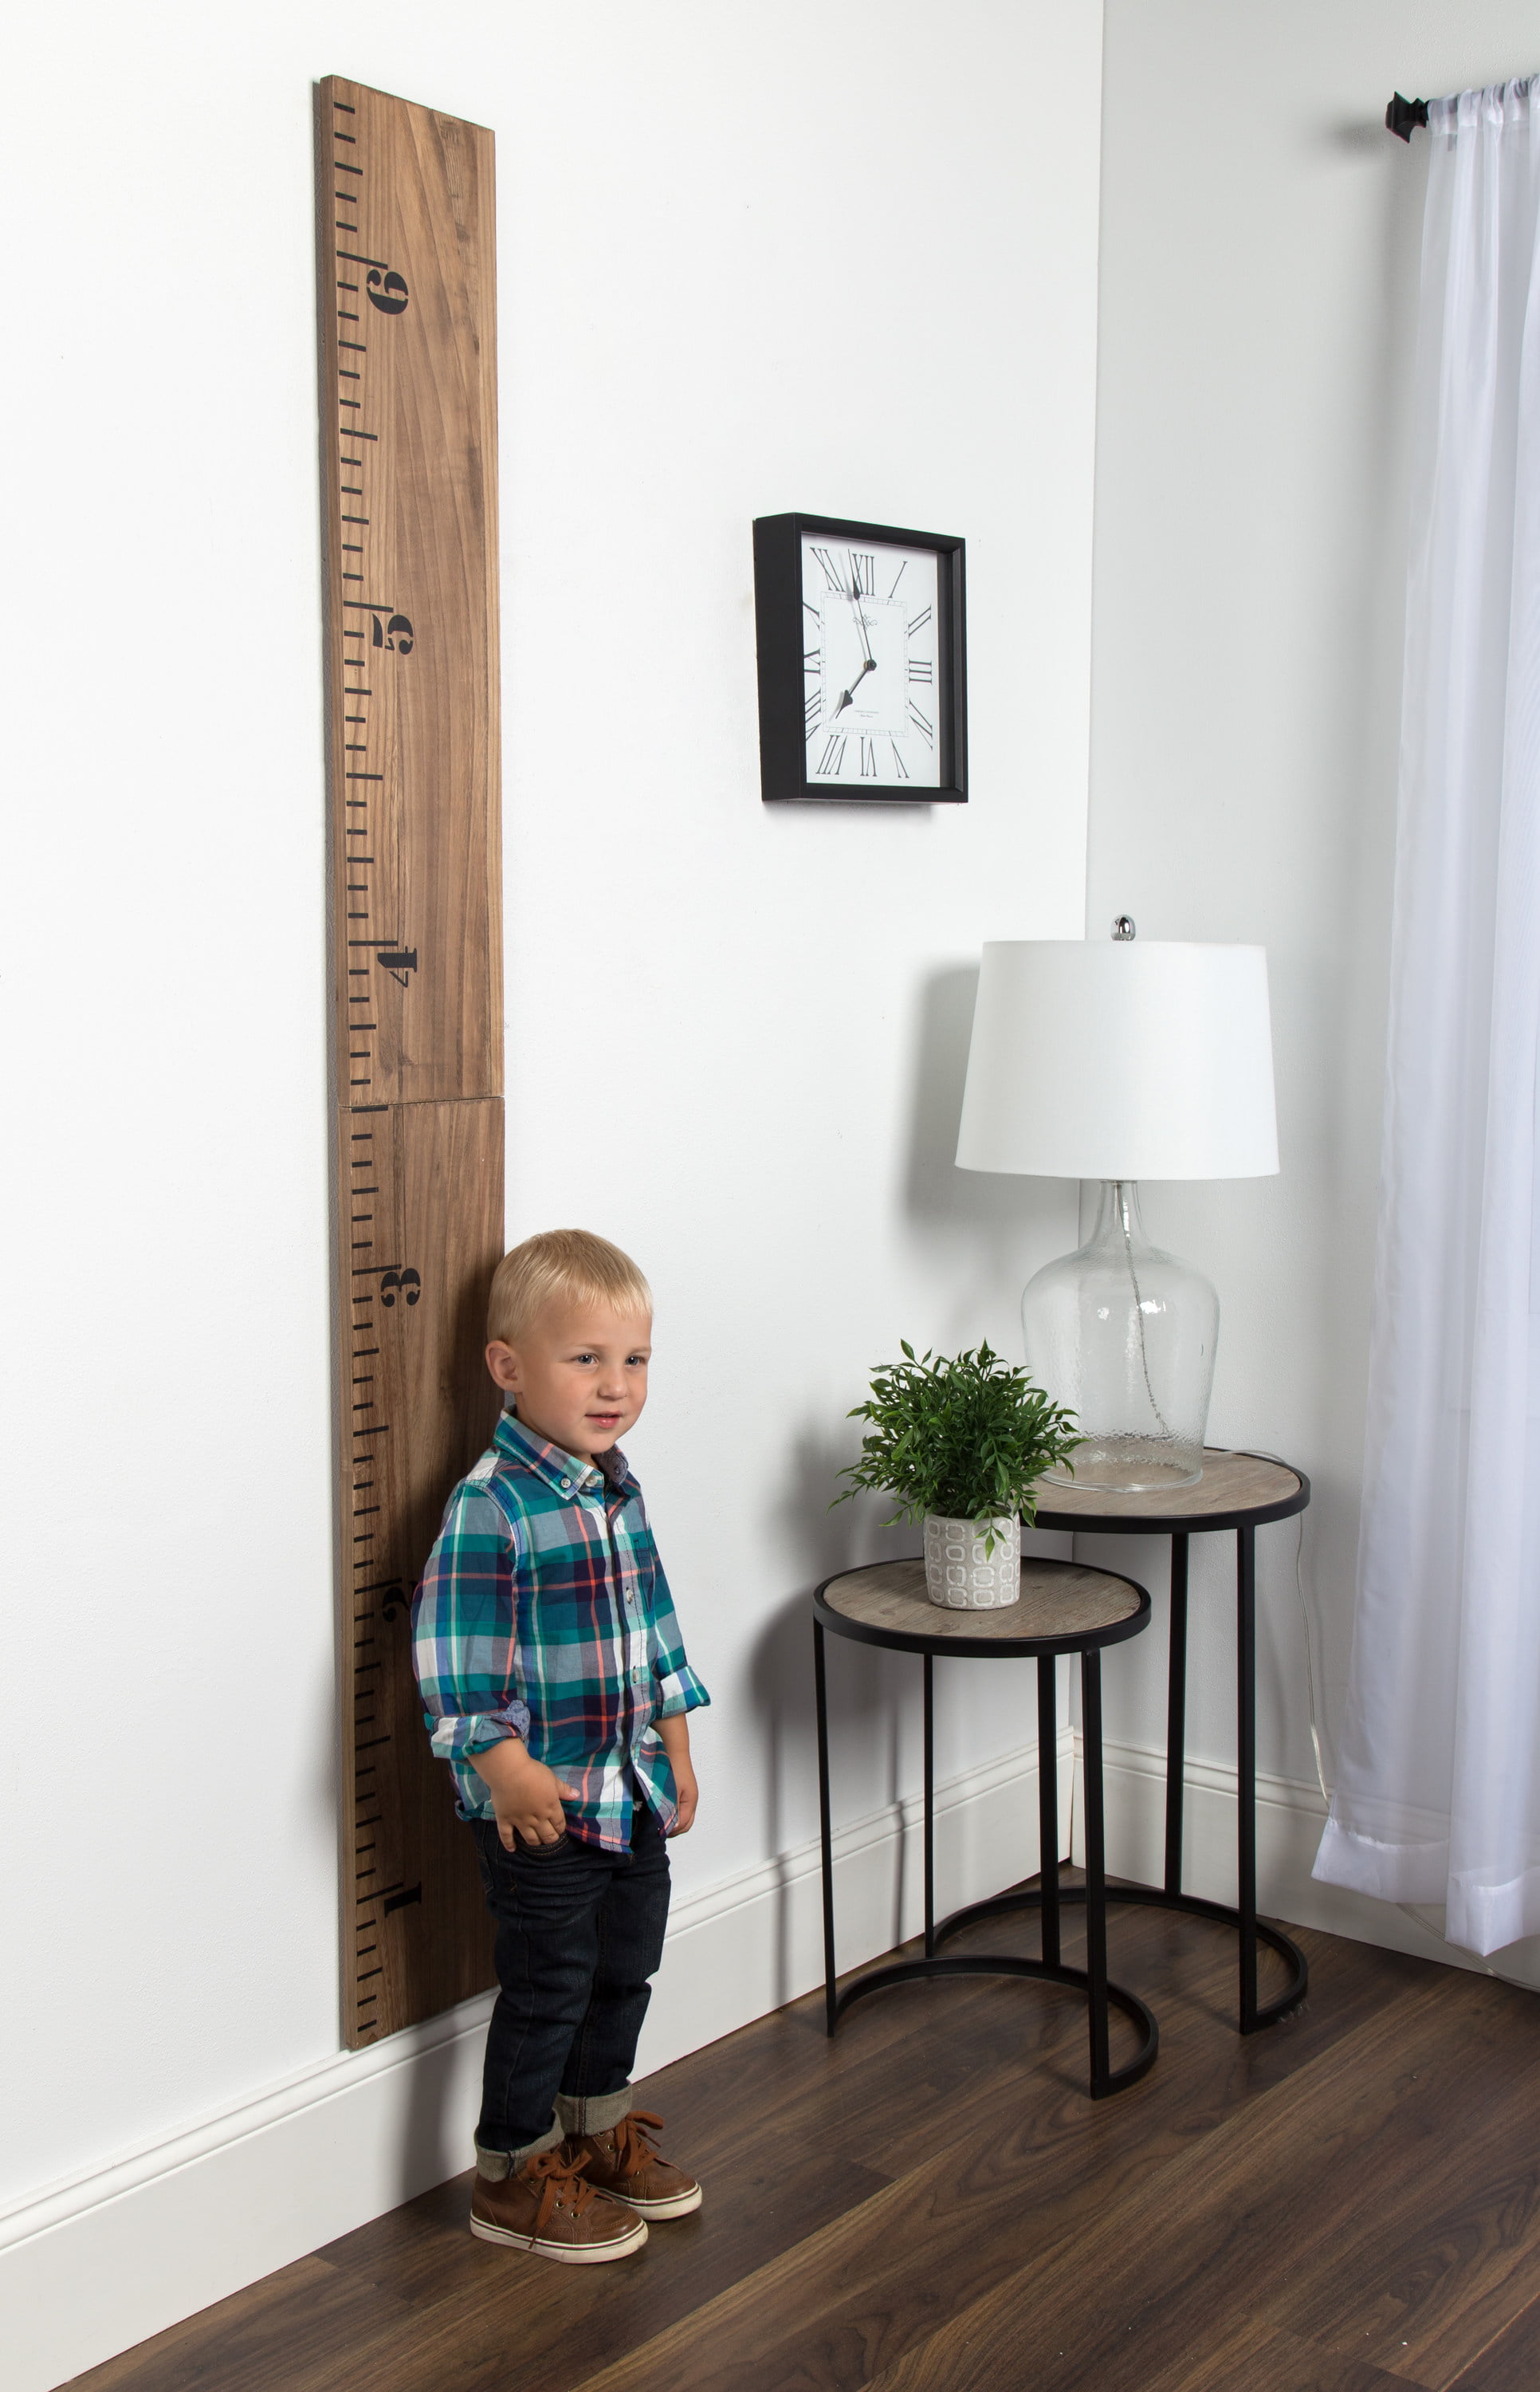 Details about   Wooden Growth Chart Height Measuring Tool Kids Decor Room Home Gray 6.5 ft Wood 